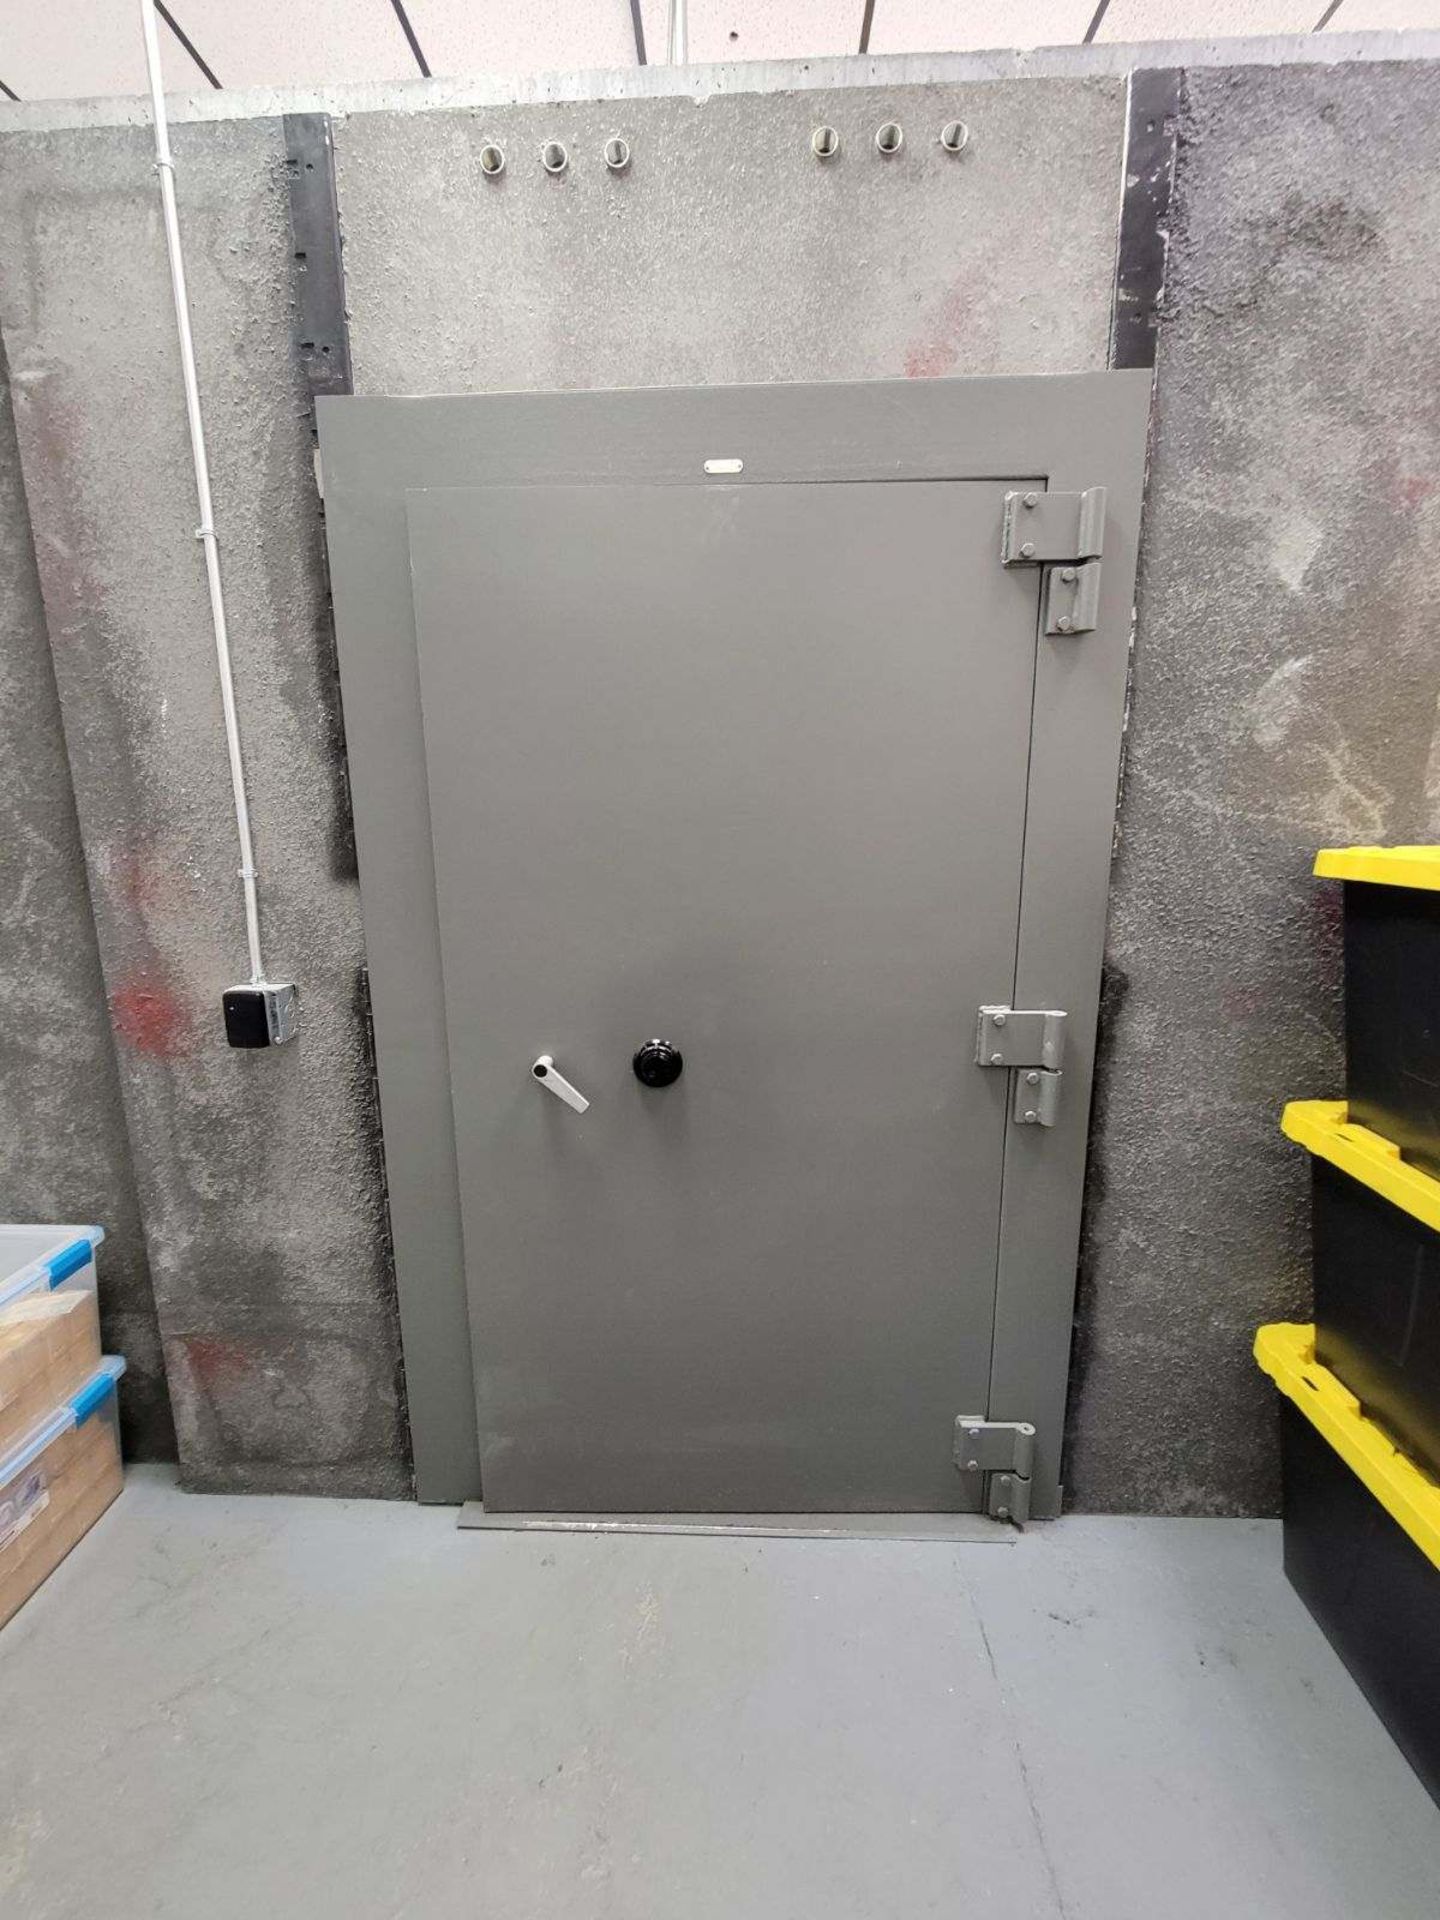 Used Hamilton Class-5 Security Bank Vault. Build-In-Place. OAD: 145" L/D x 145" x 106" H